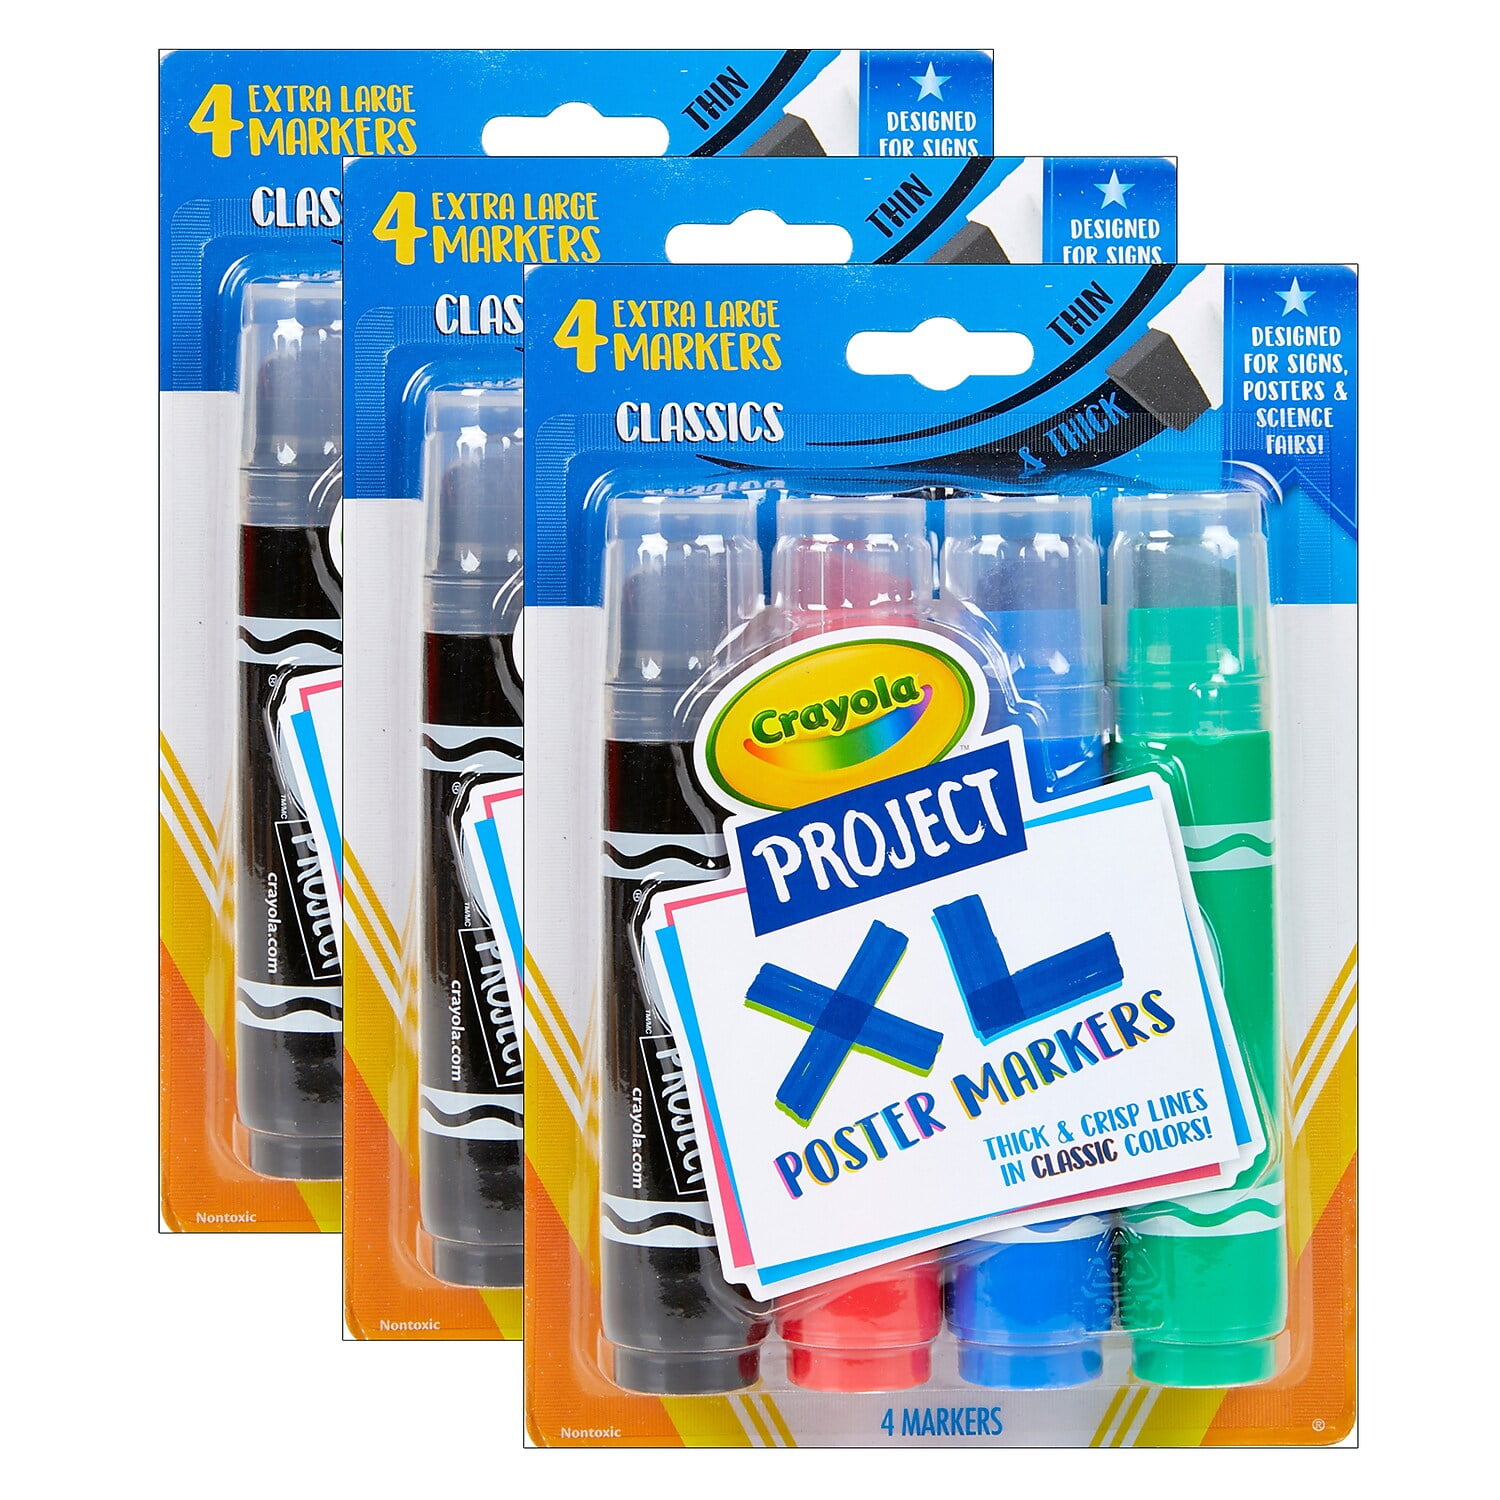  Crayola Project: XL Poster Marker, Black Single ct, Multi  (58-8360) : Office Products